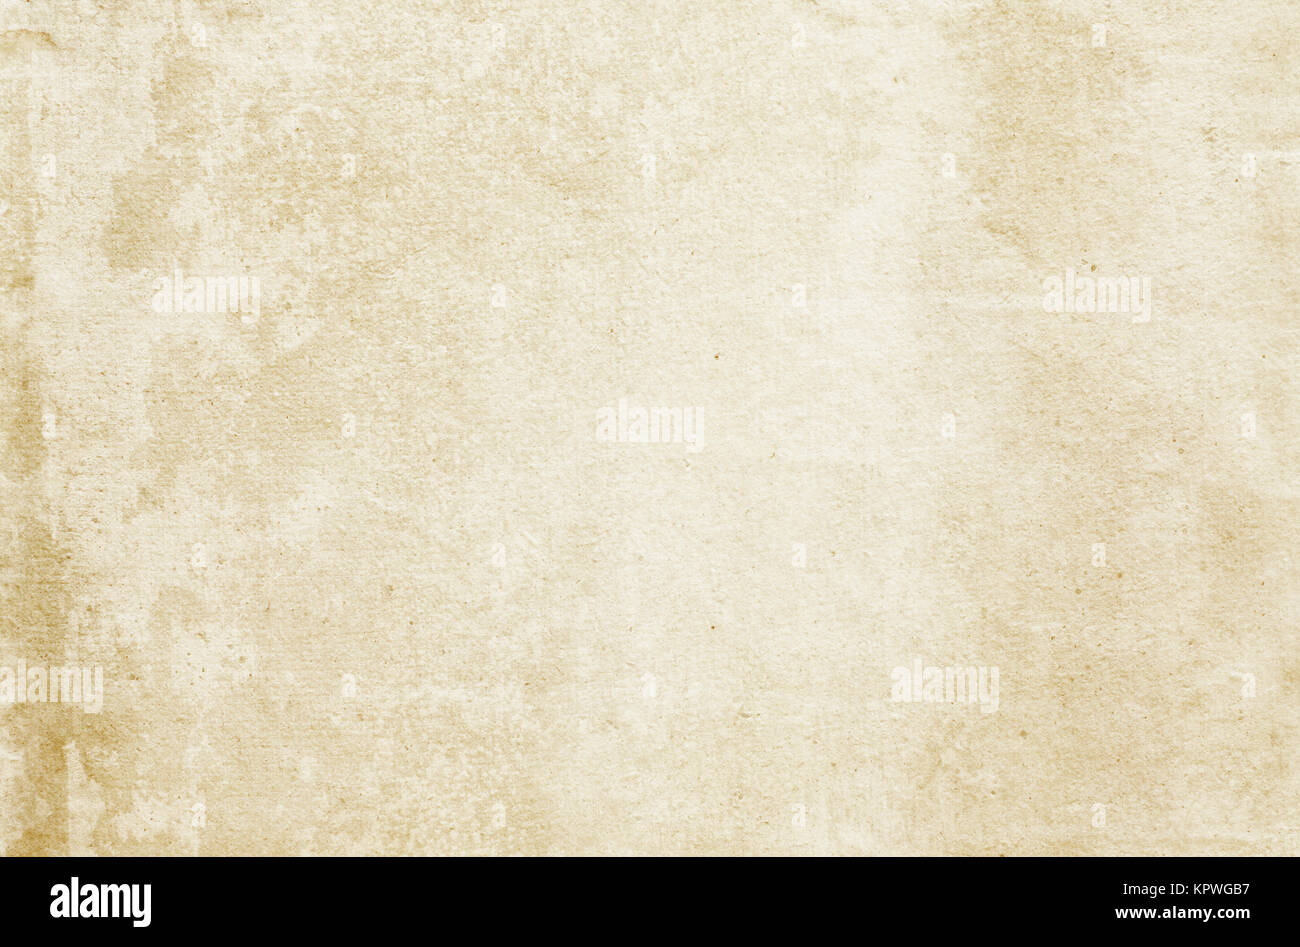 Aging stained paper background. Natural paper texture for the design. Stock Photo